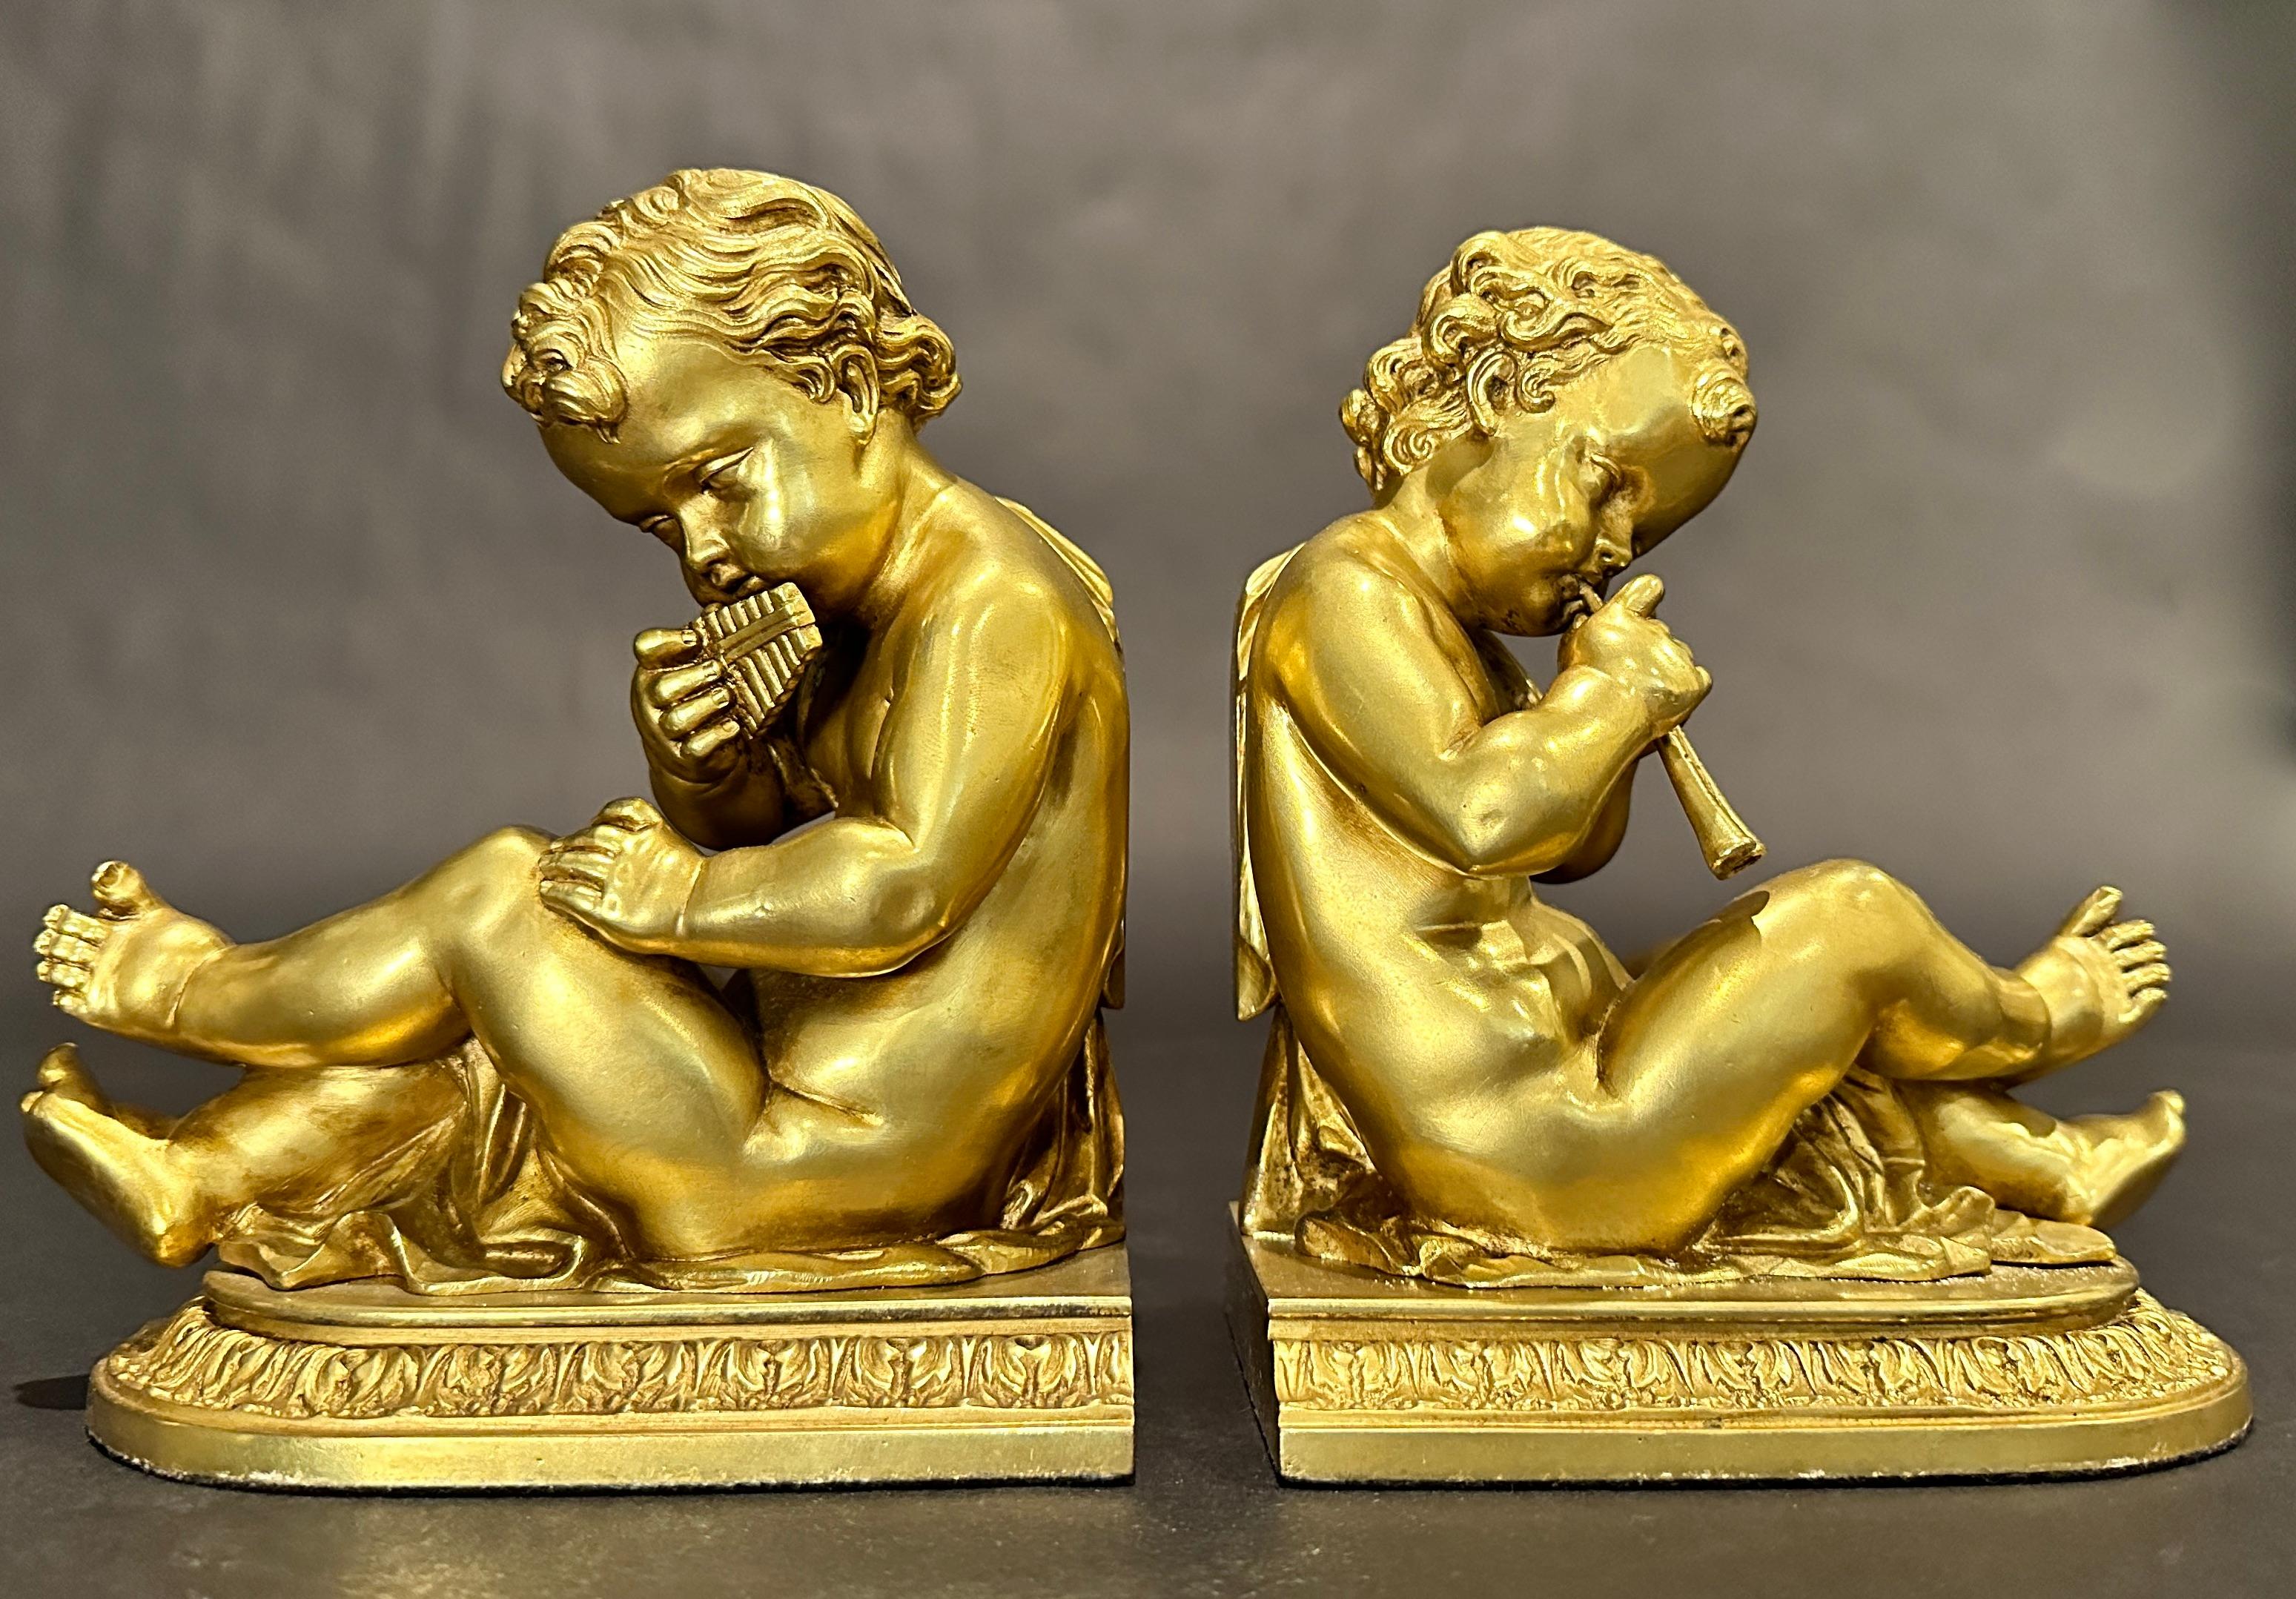 Pair of fine quality antique French gilt bronze bookends. Each depicting a young child/putti playing a musical instrument. One a syrinx( after the instrument designed by the God Pan), the other a Aulos(double-reeded flute), seated on drapery.
Each